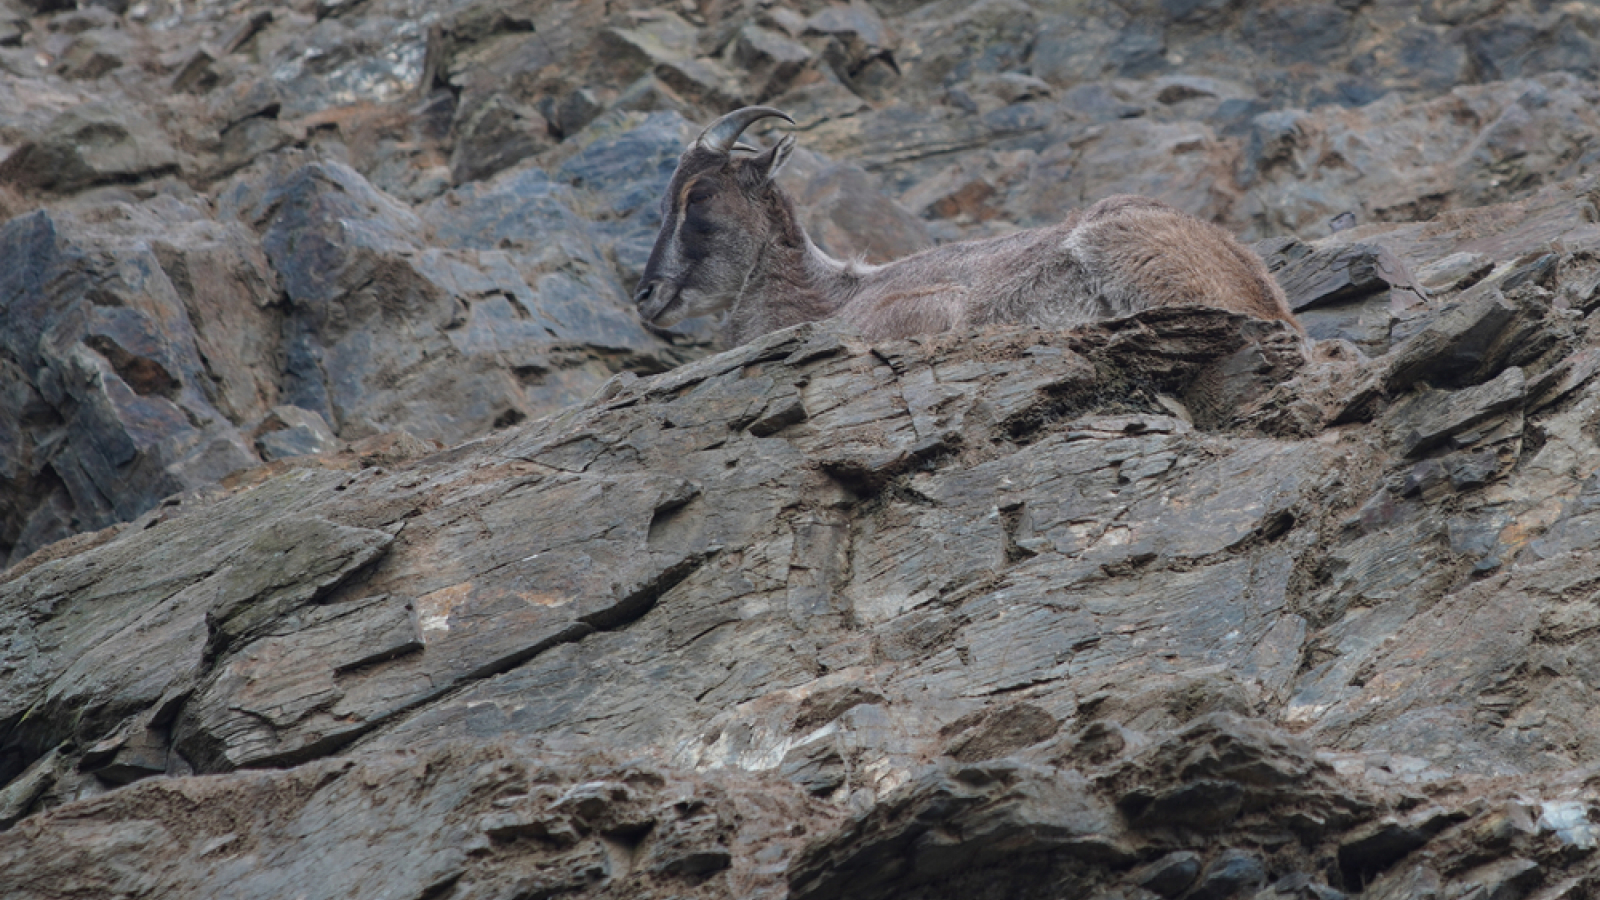 Perfect camouflage of the Himalayan tahr against the dark rocks.